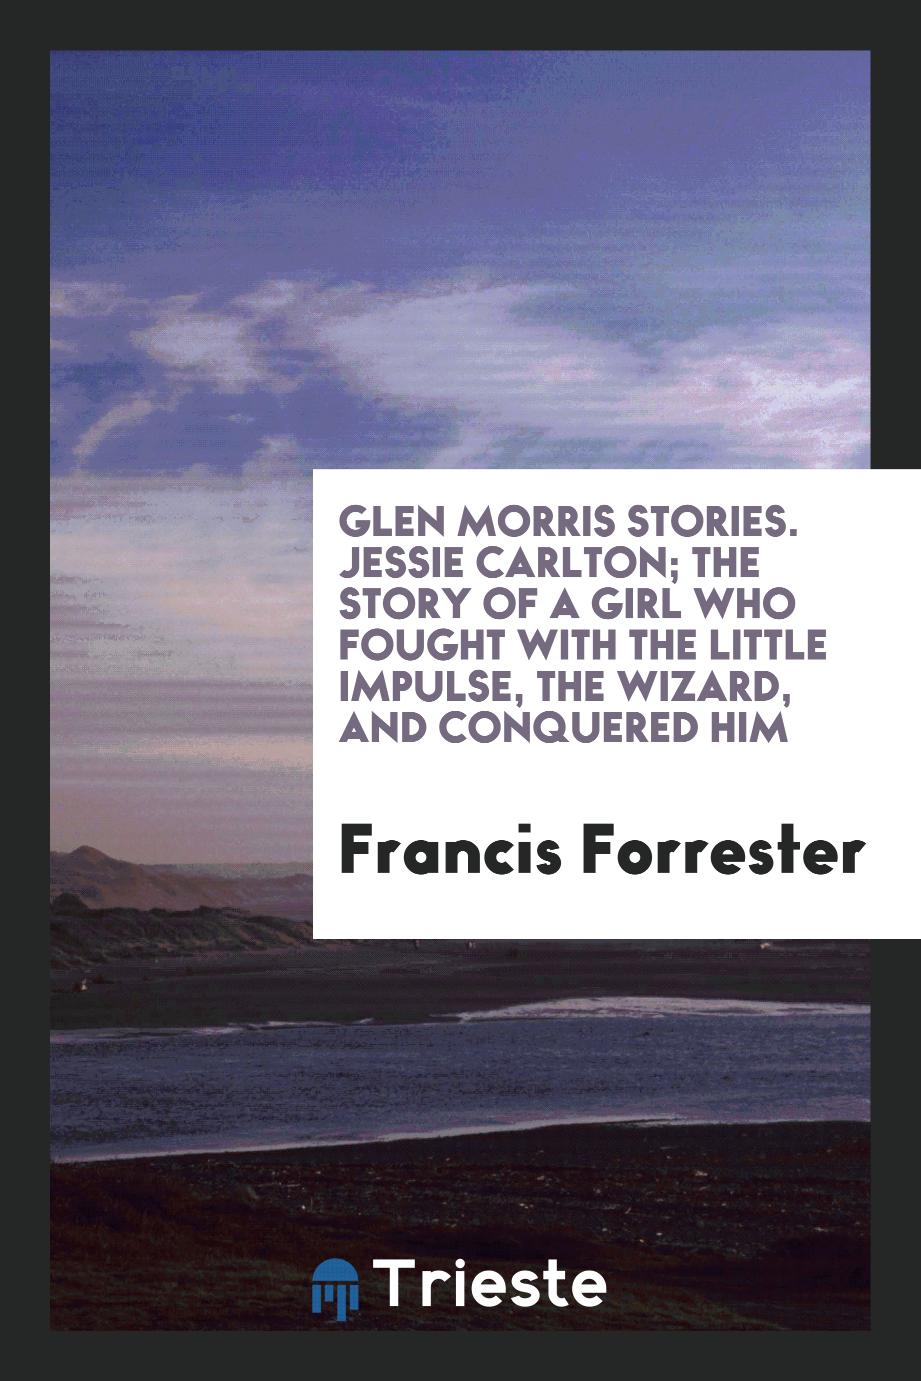 Glen Morris stories. Jessie Carlton; the story of a girl who fought with the little impulse, the wizard, and conquered him